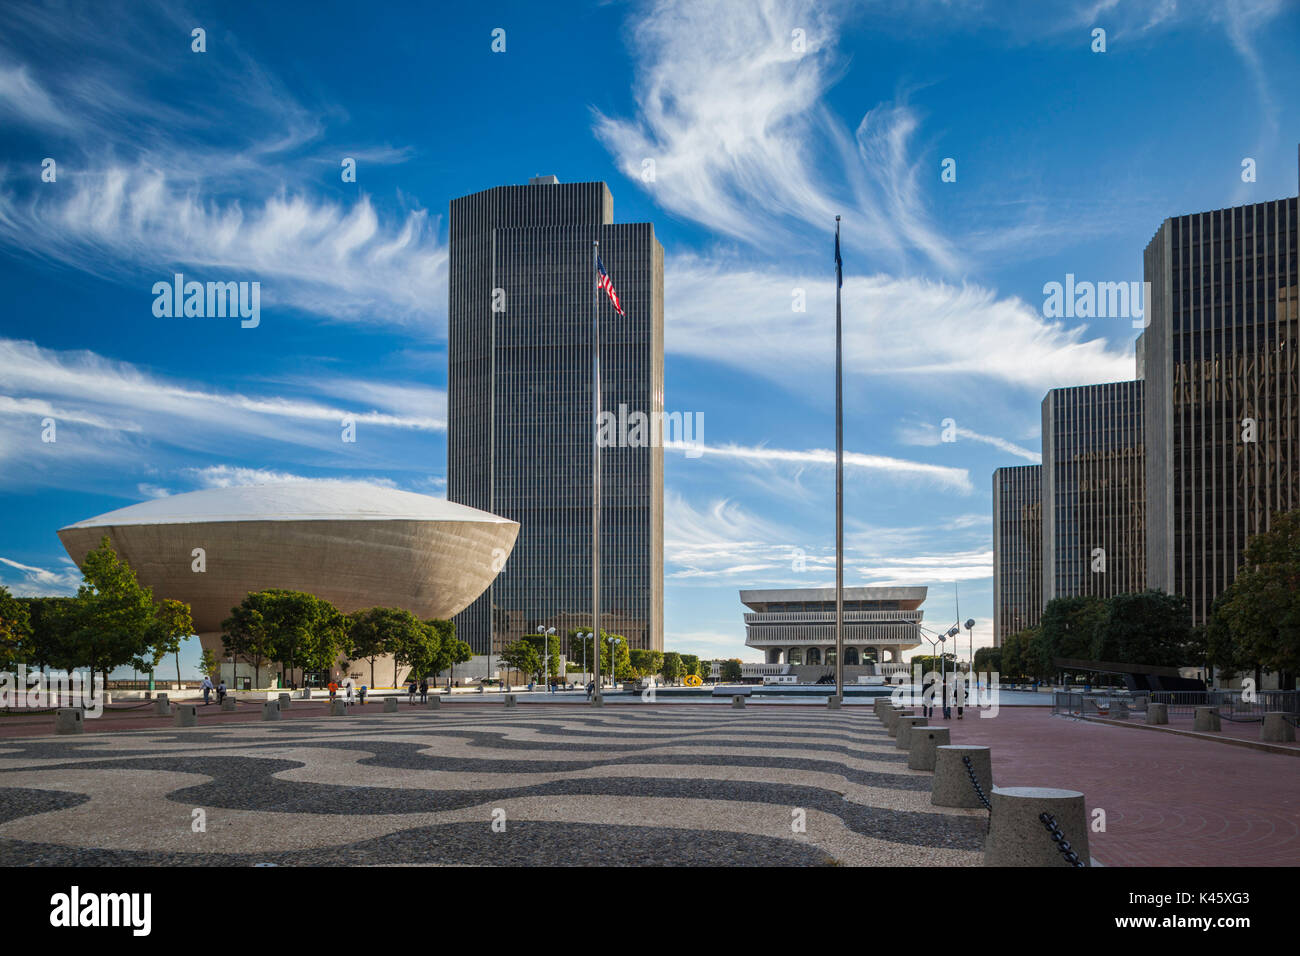 USA, New York, Hudson Valley, Albany, New York State Capitol, Rockefeller Empire State Plaza, The Egg State Theater and Corning Tower Stock Photo